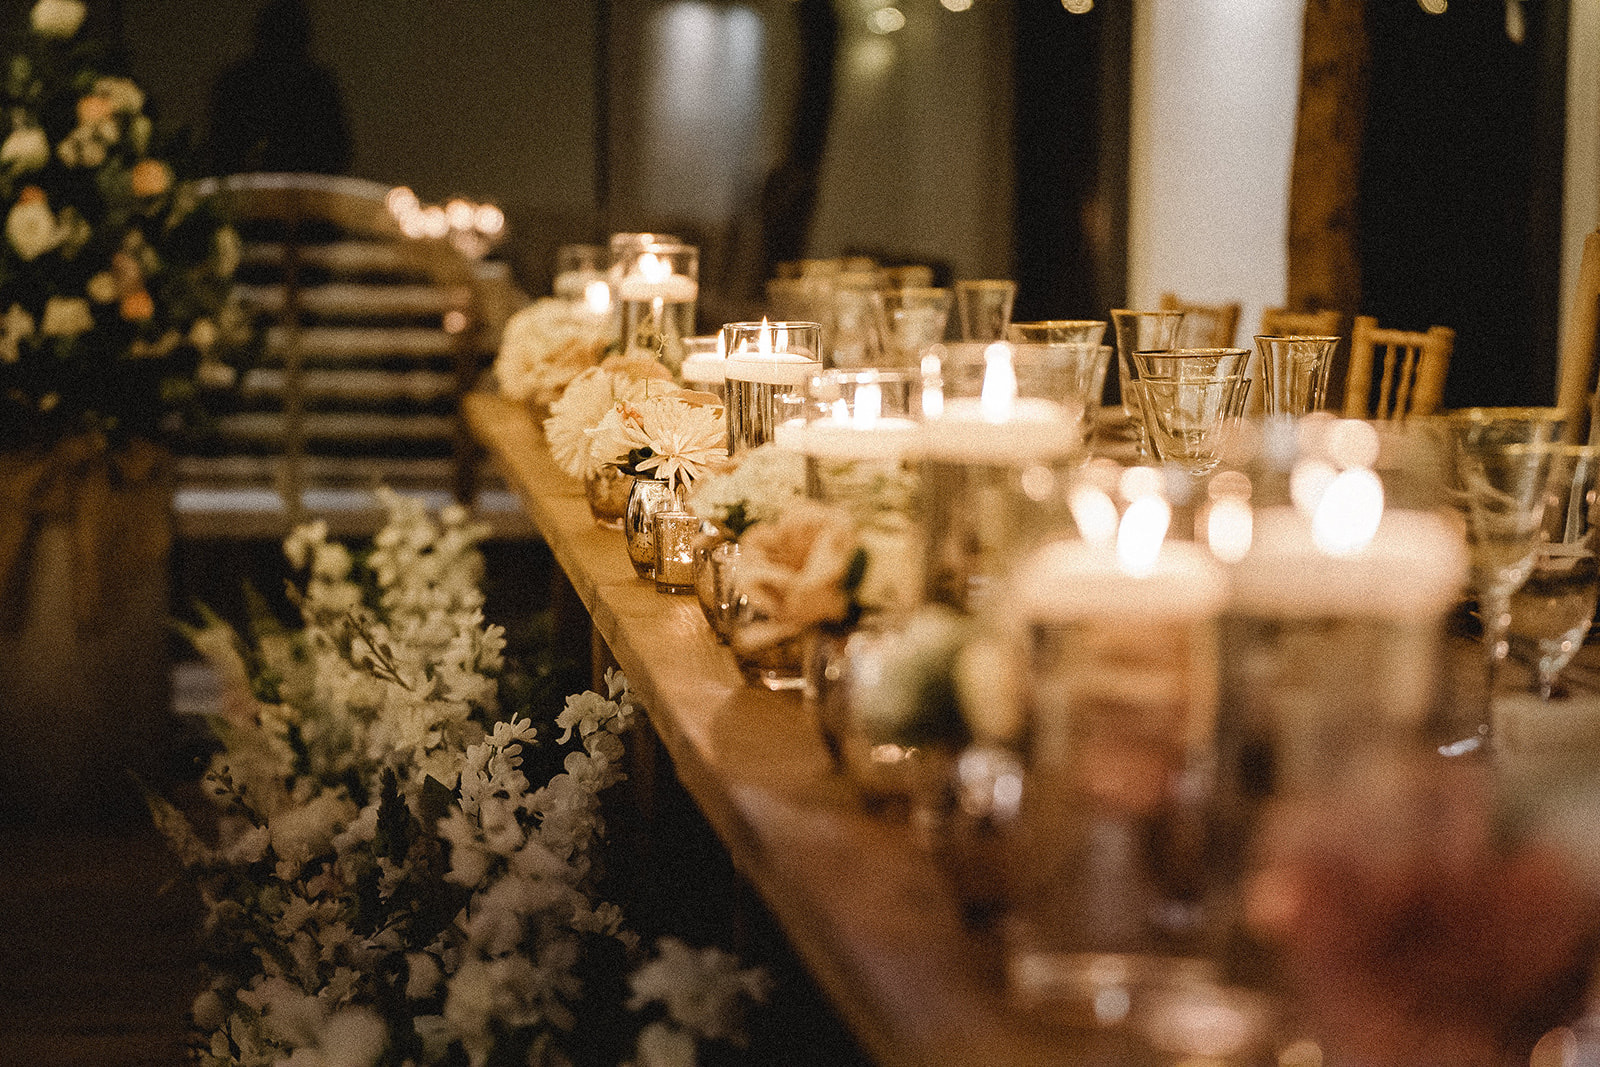 Candlelit table scape